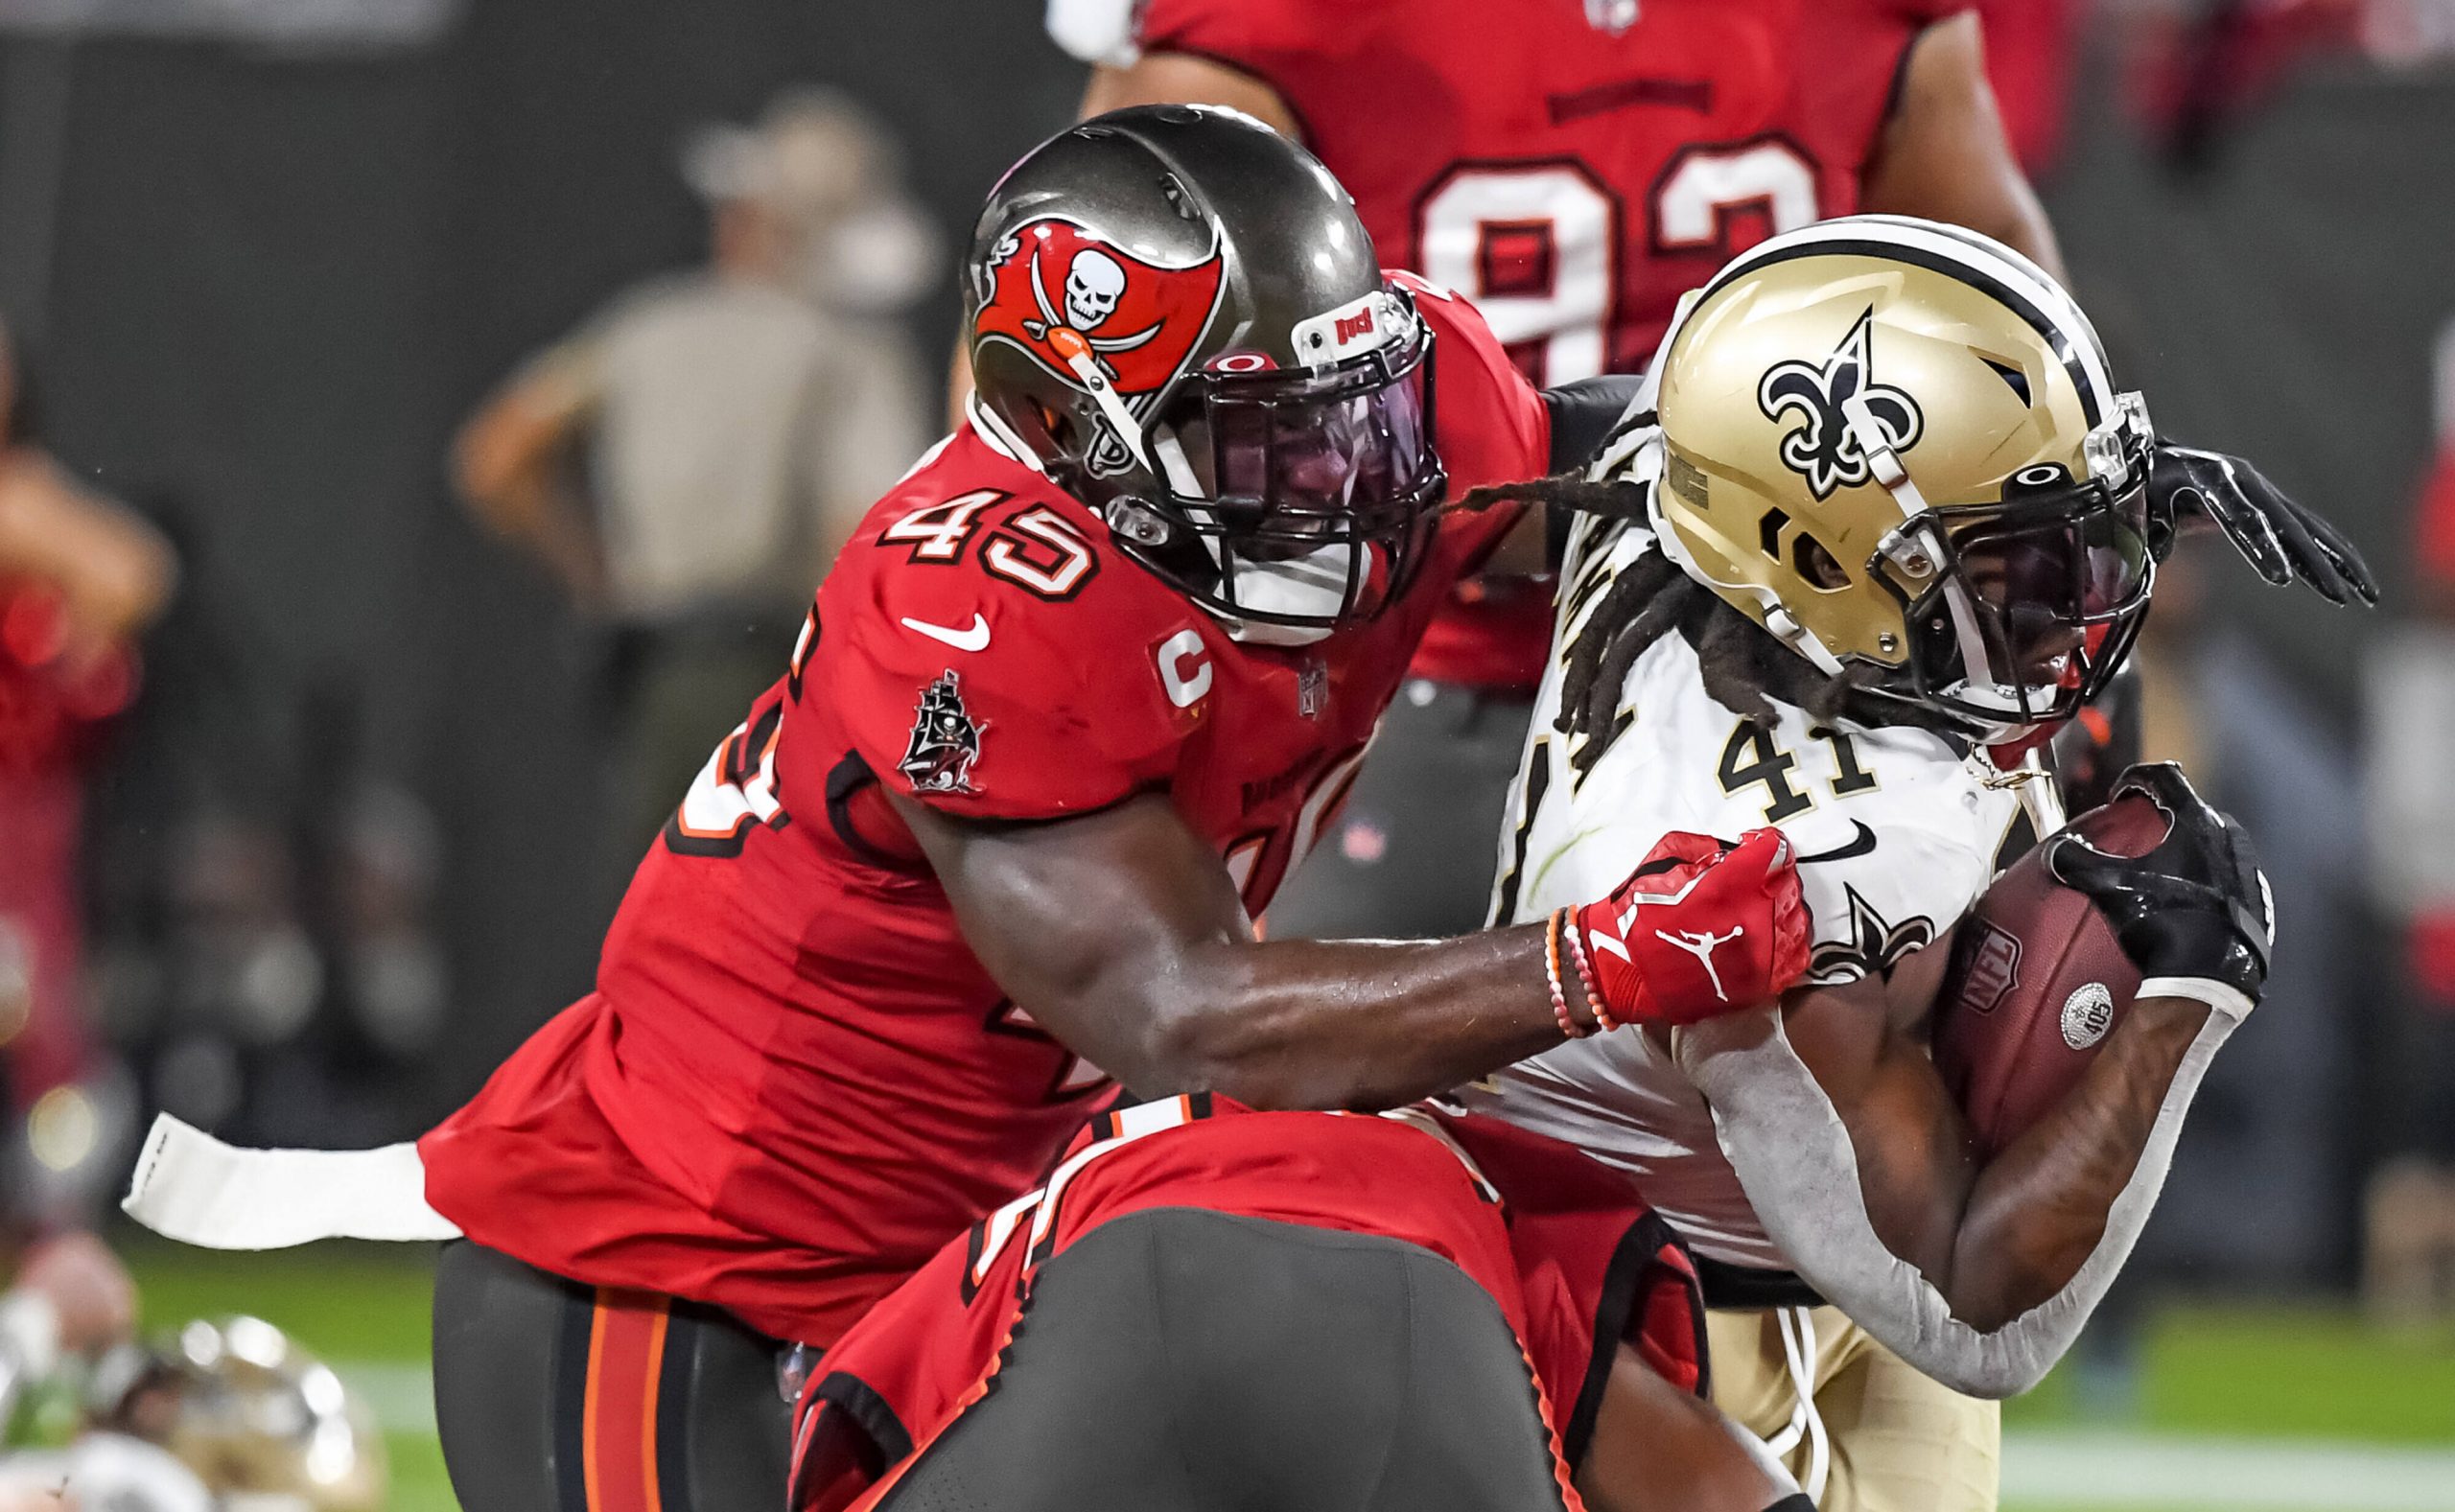 Tampa Bay Buccaneers Devin White 45 wraps up New Orleans Saints running back Alvin Kamara 41 during the first half at Raymond James Stadium in Tampa, Florida on Sunday, December 19, 2021. PUBLICATIONxINxGERxSUIxAUTxHUNxONLY TPA20211219107 STEVExNESIUS